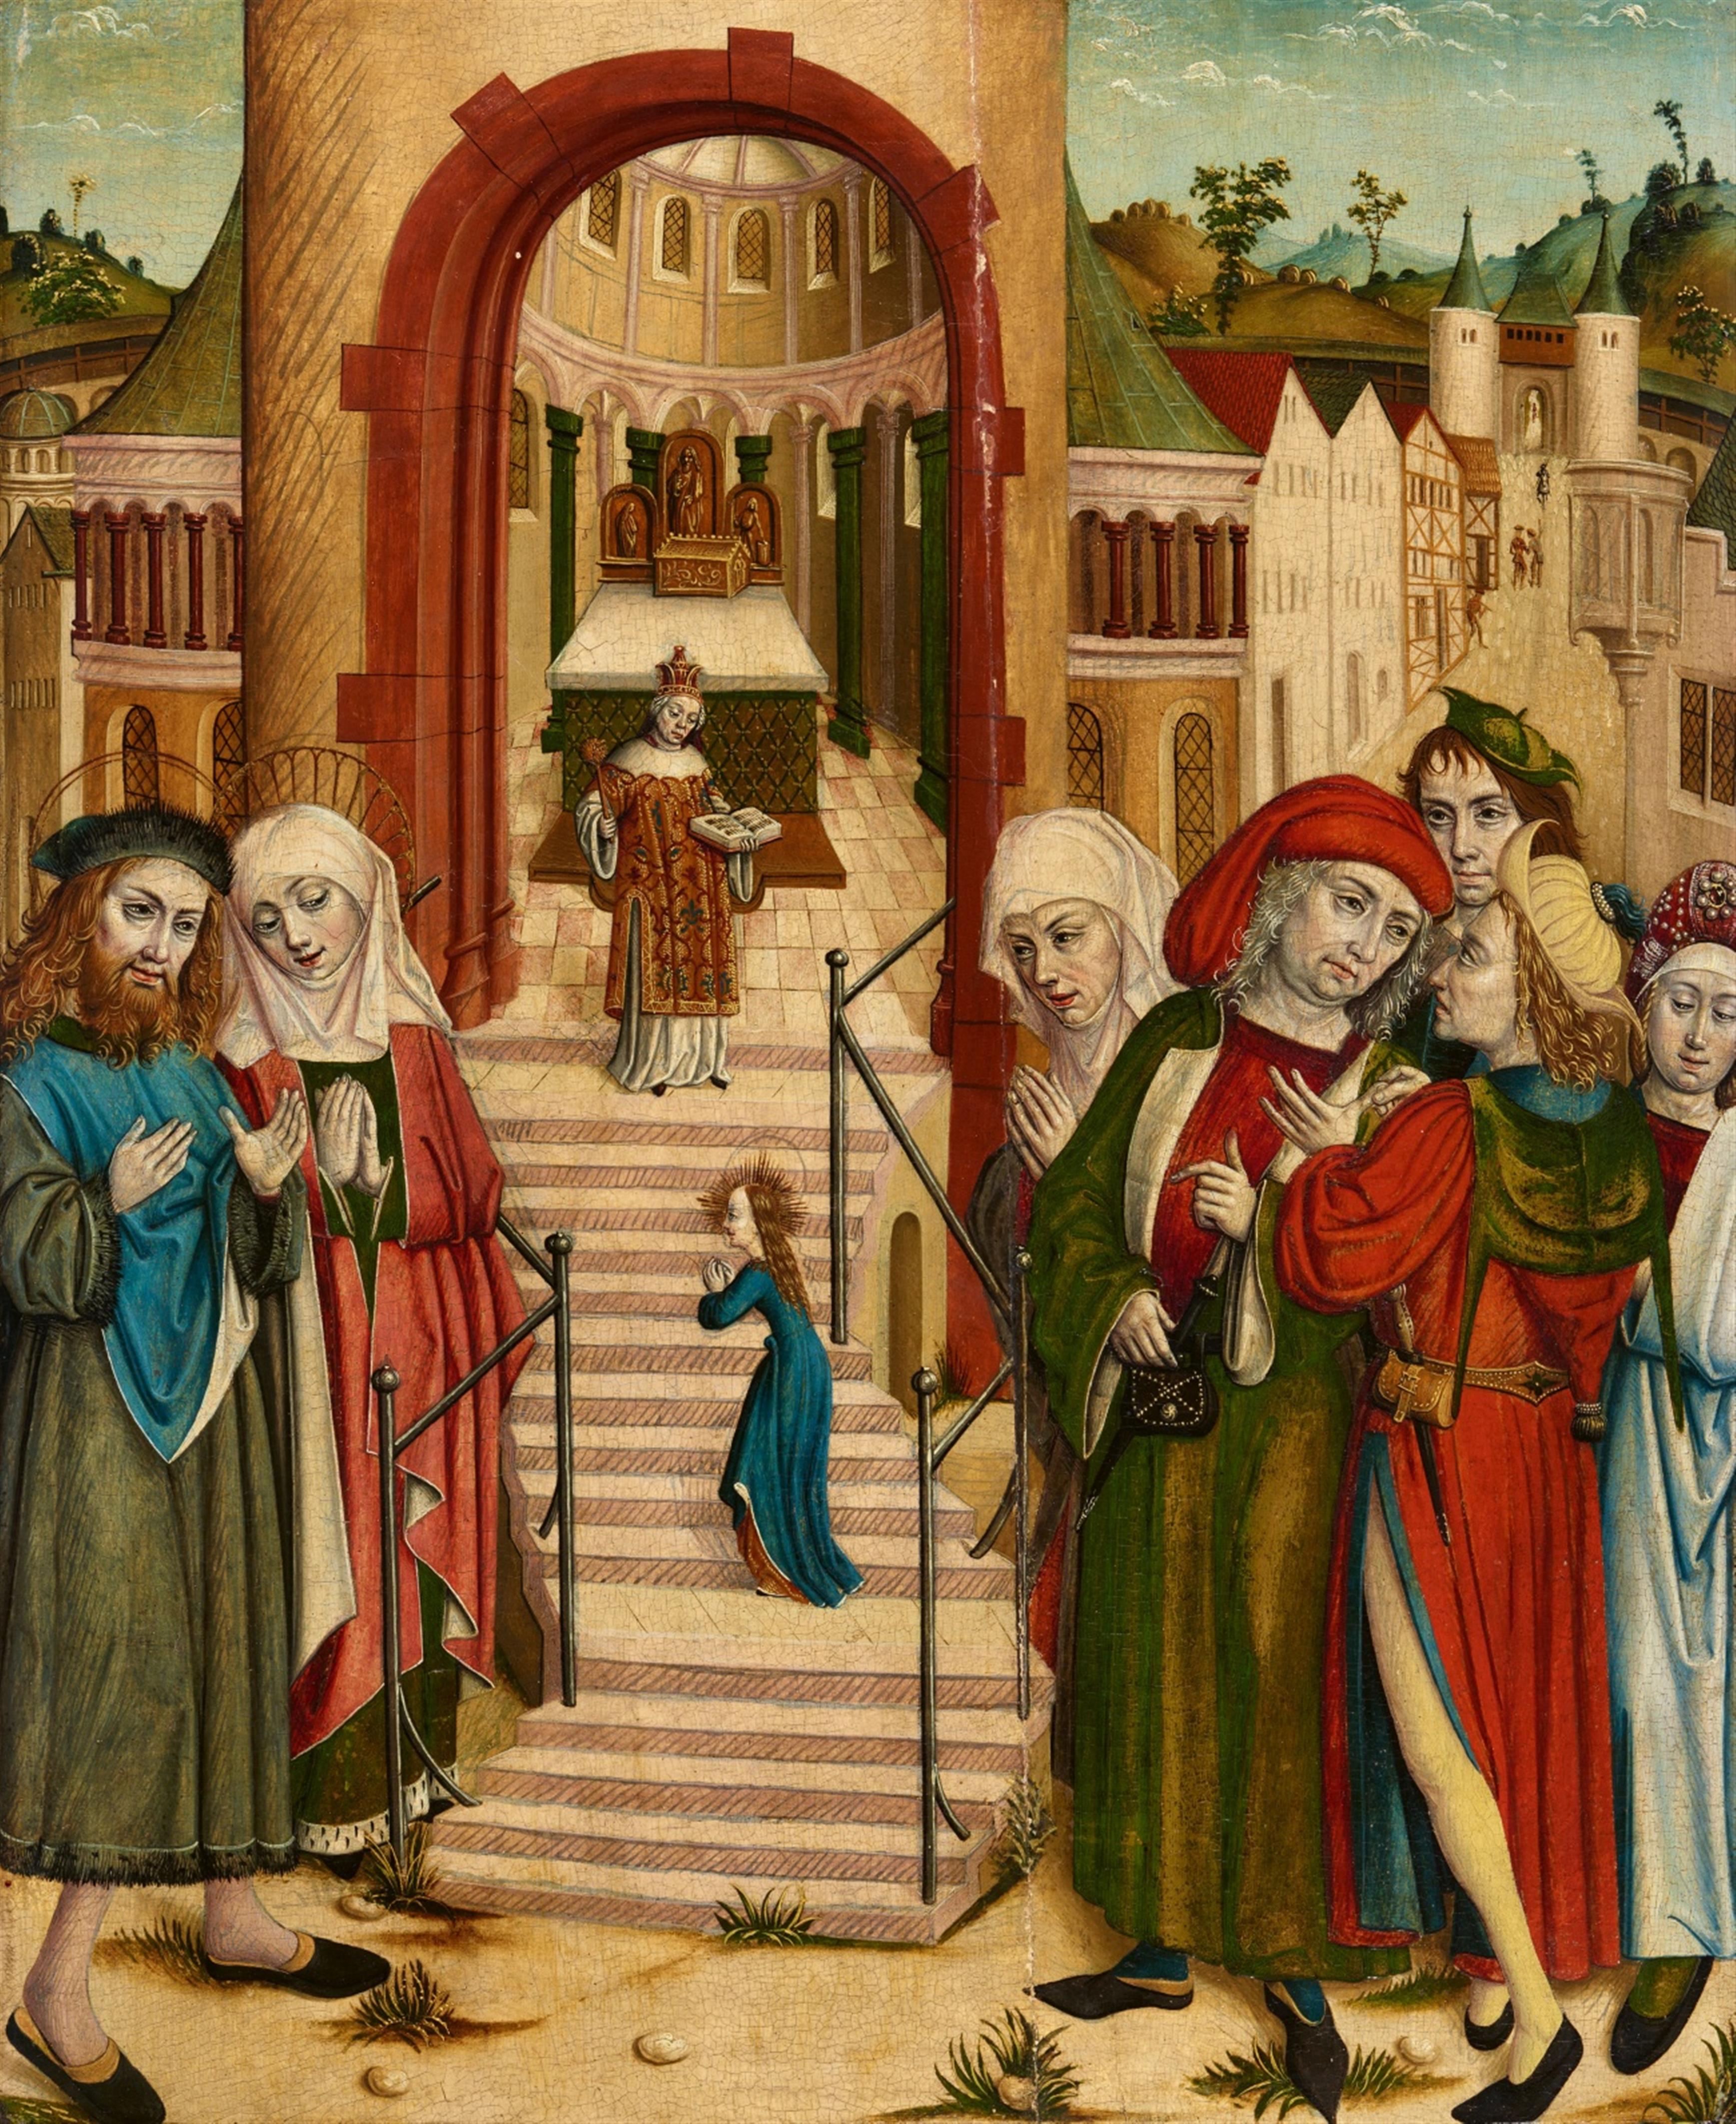 Cologne School circa 1500 - The Presentation of the Virgin Mary at the Temple - image-1